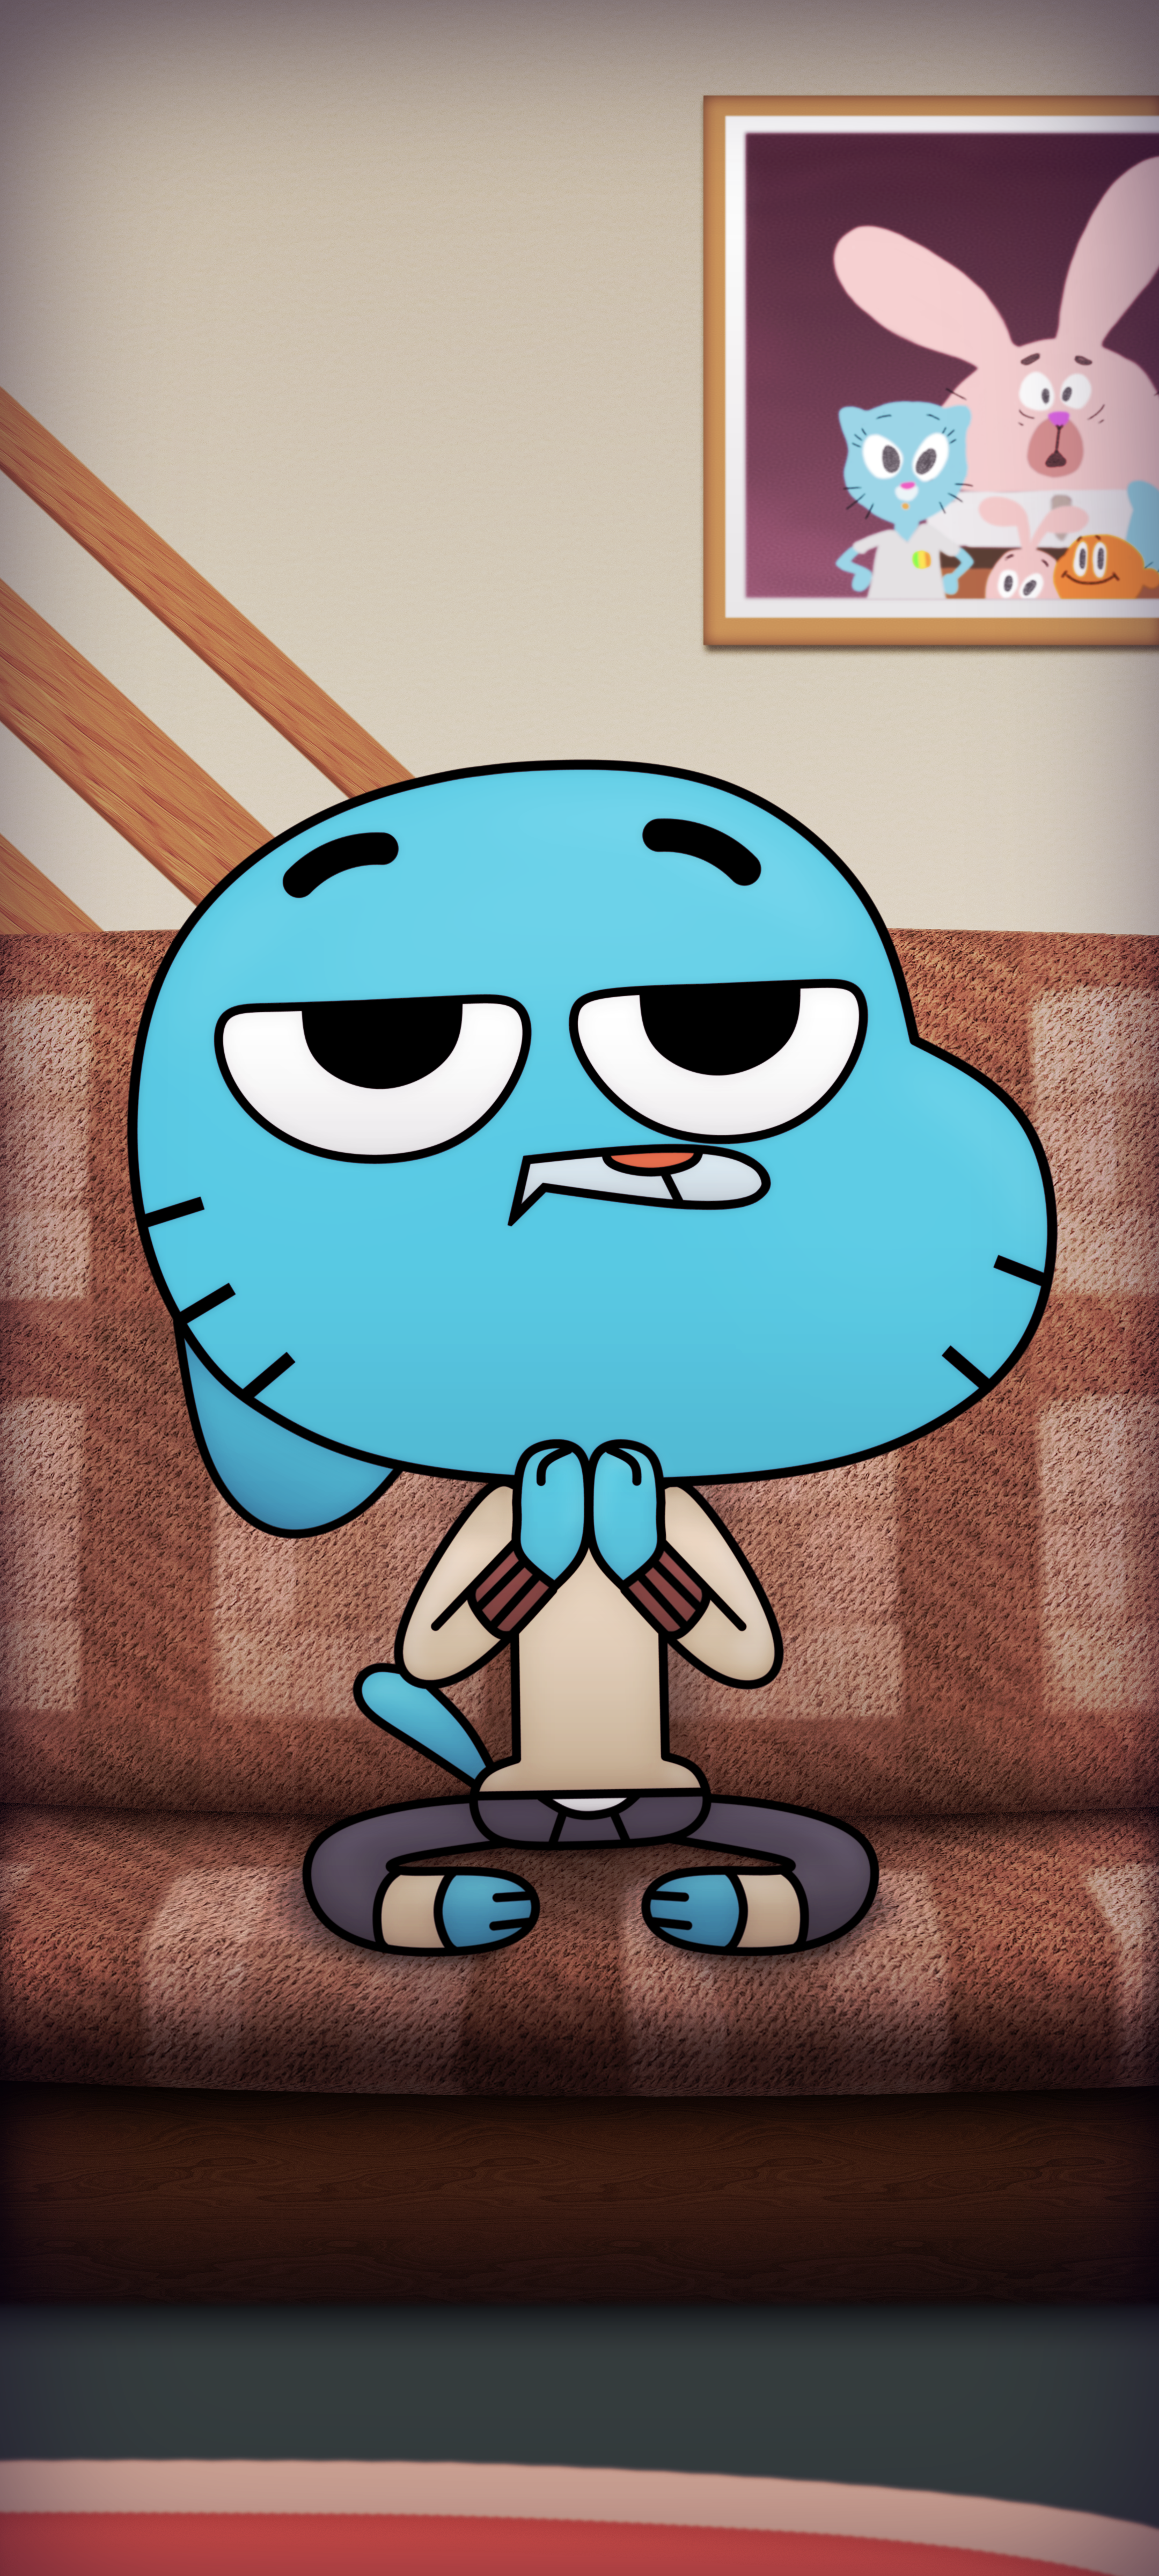 A wallpaper I made of Gumball